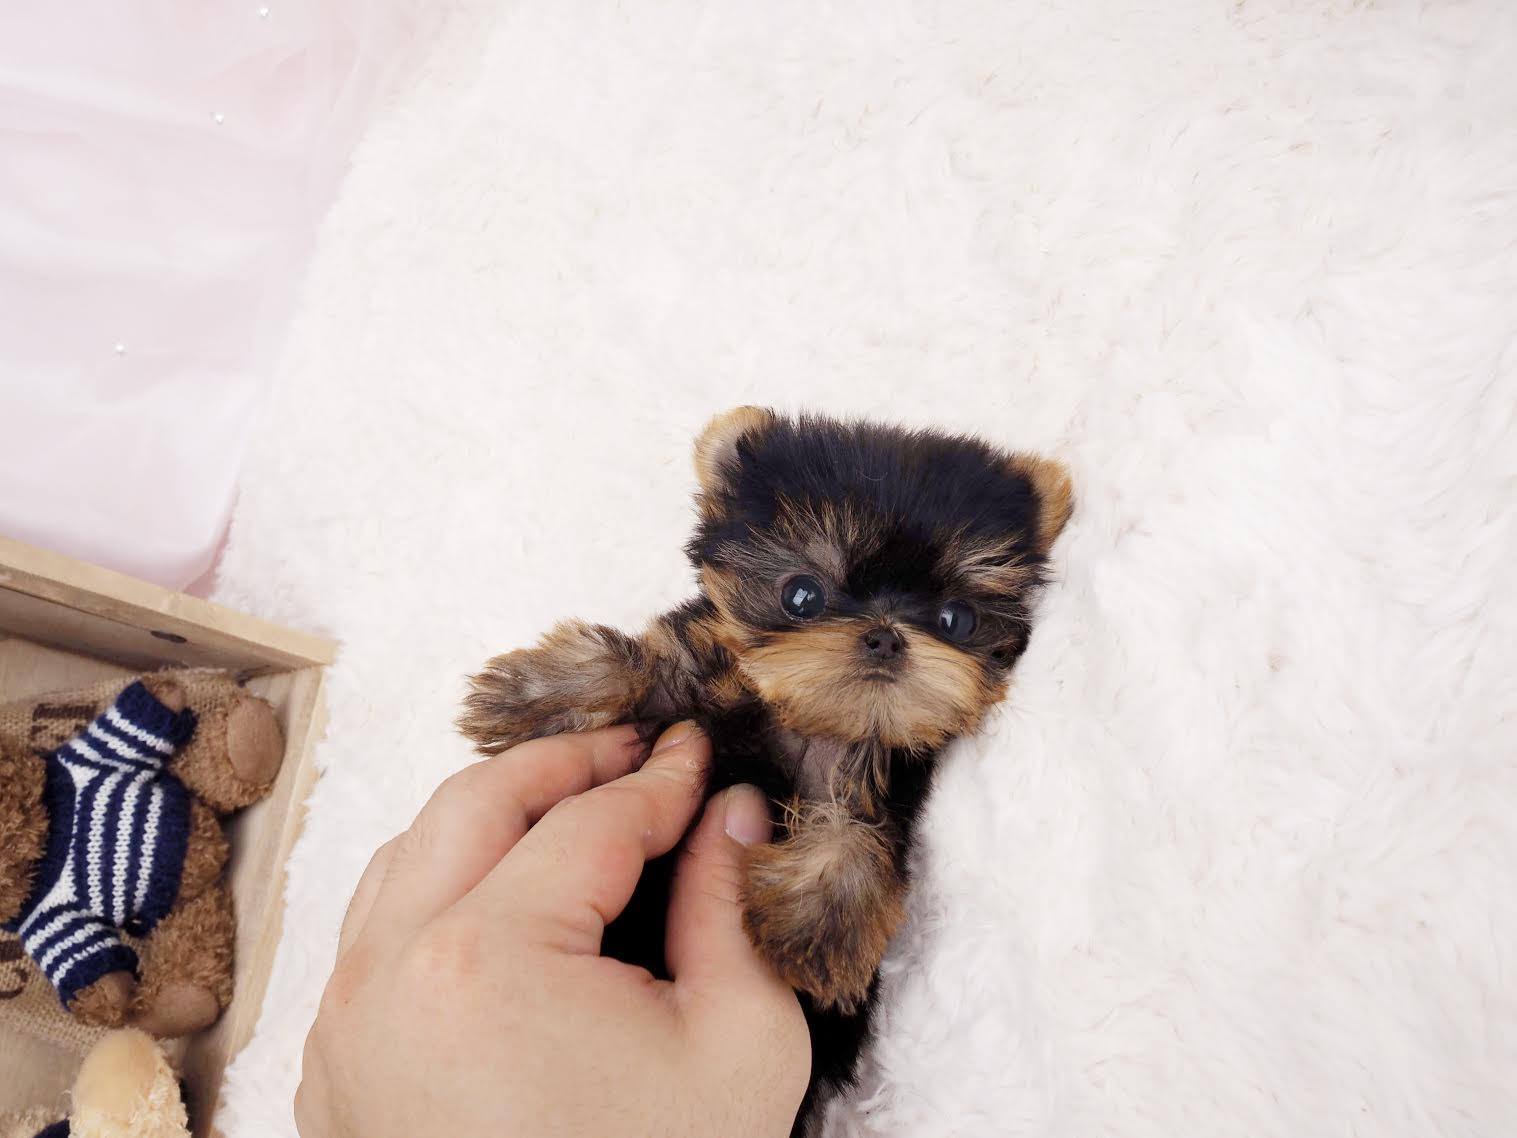 Ashley Micro Yorkie for Sale